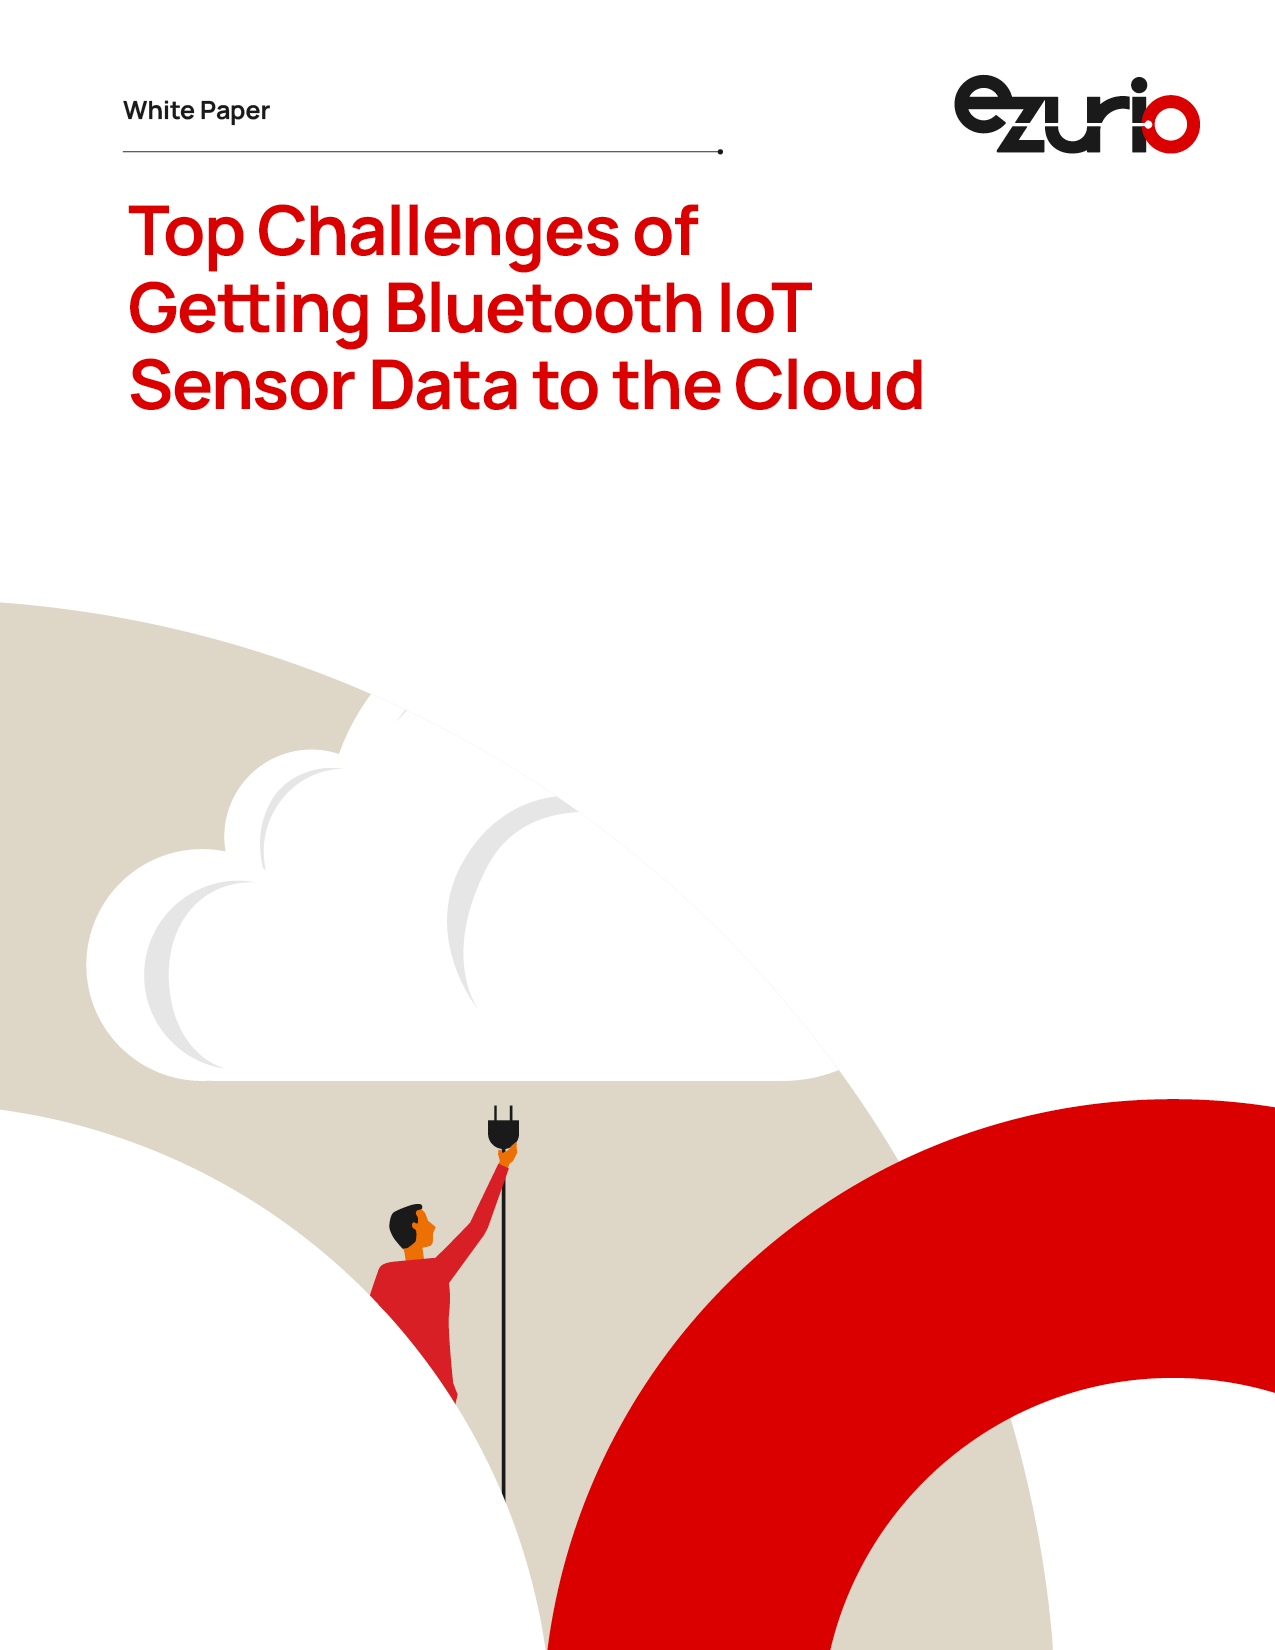 Top Challenges of Getting Bluetooth IoT Sensor Data to the Cloud